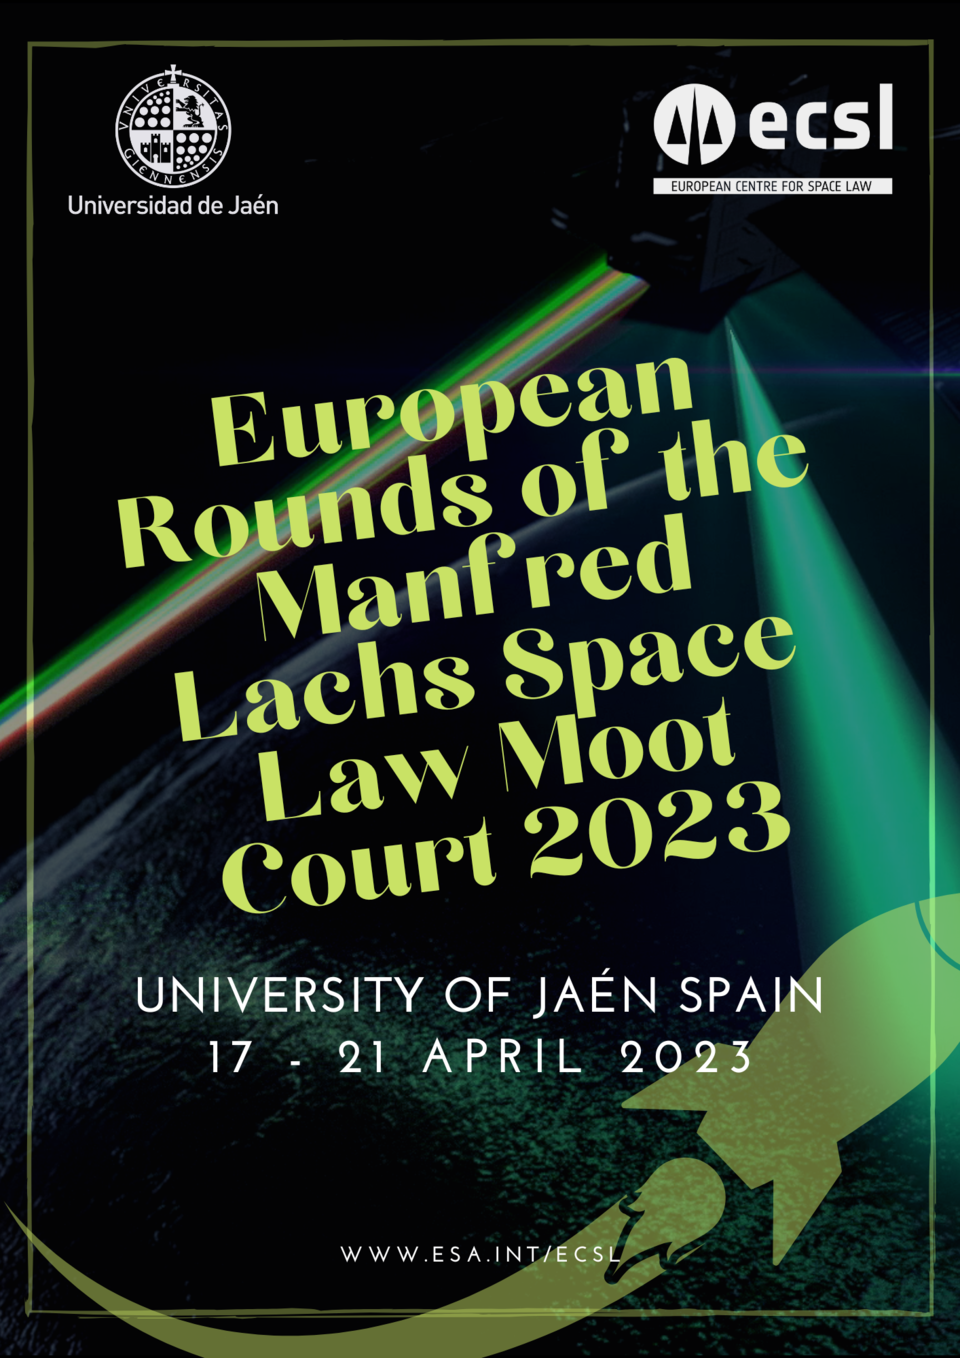 2023 European Rounds of the Manfred Lachs Space Law Moot Court